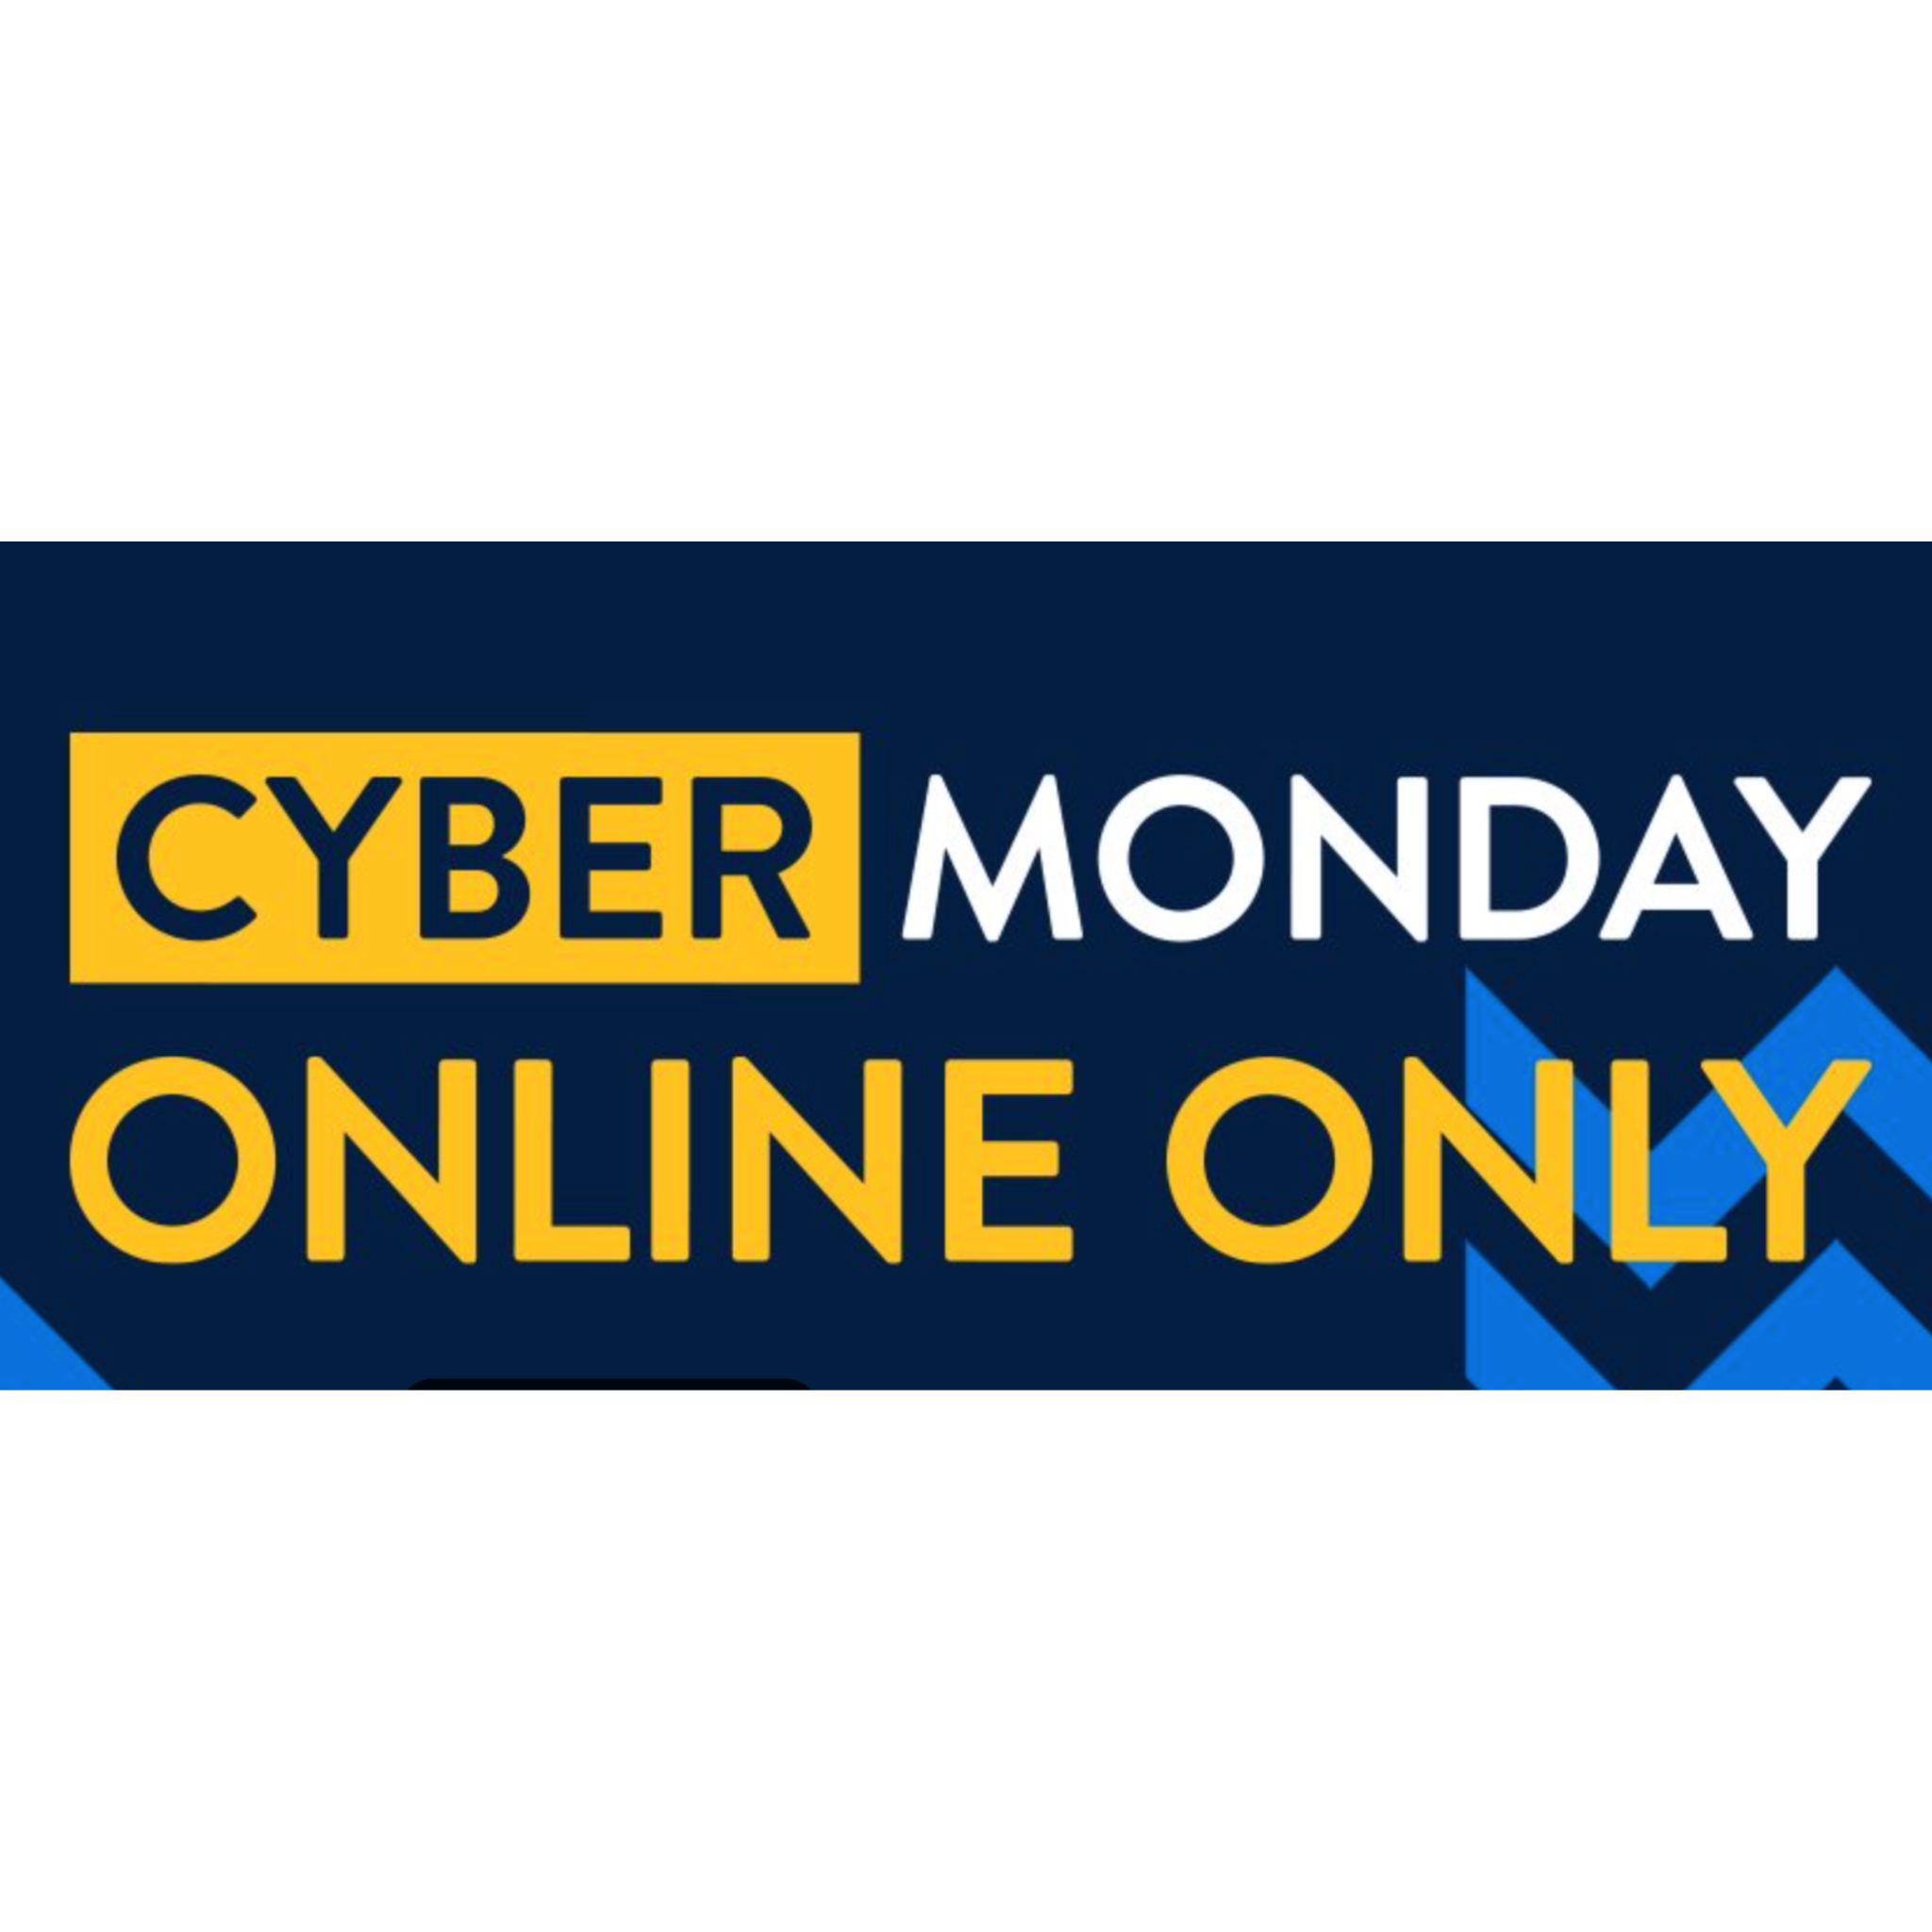 Pz's List Of The Top 48 Walmart Cyber Monday Deals That Expire In 1 Hour